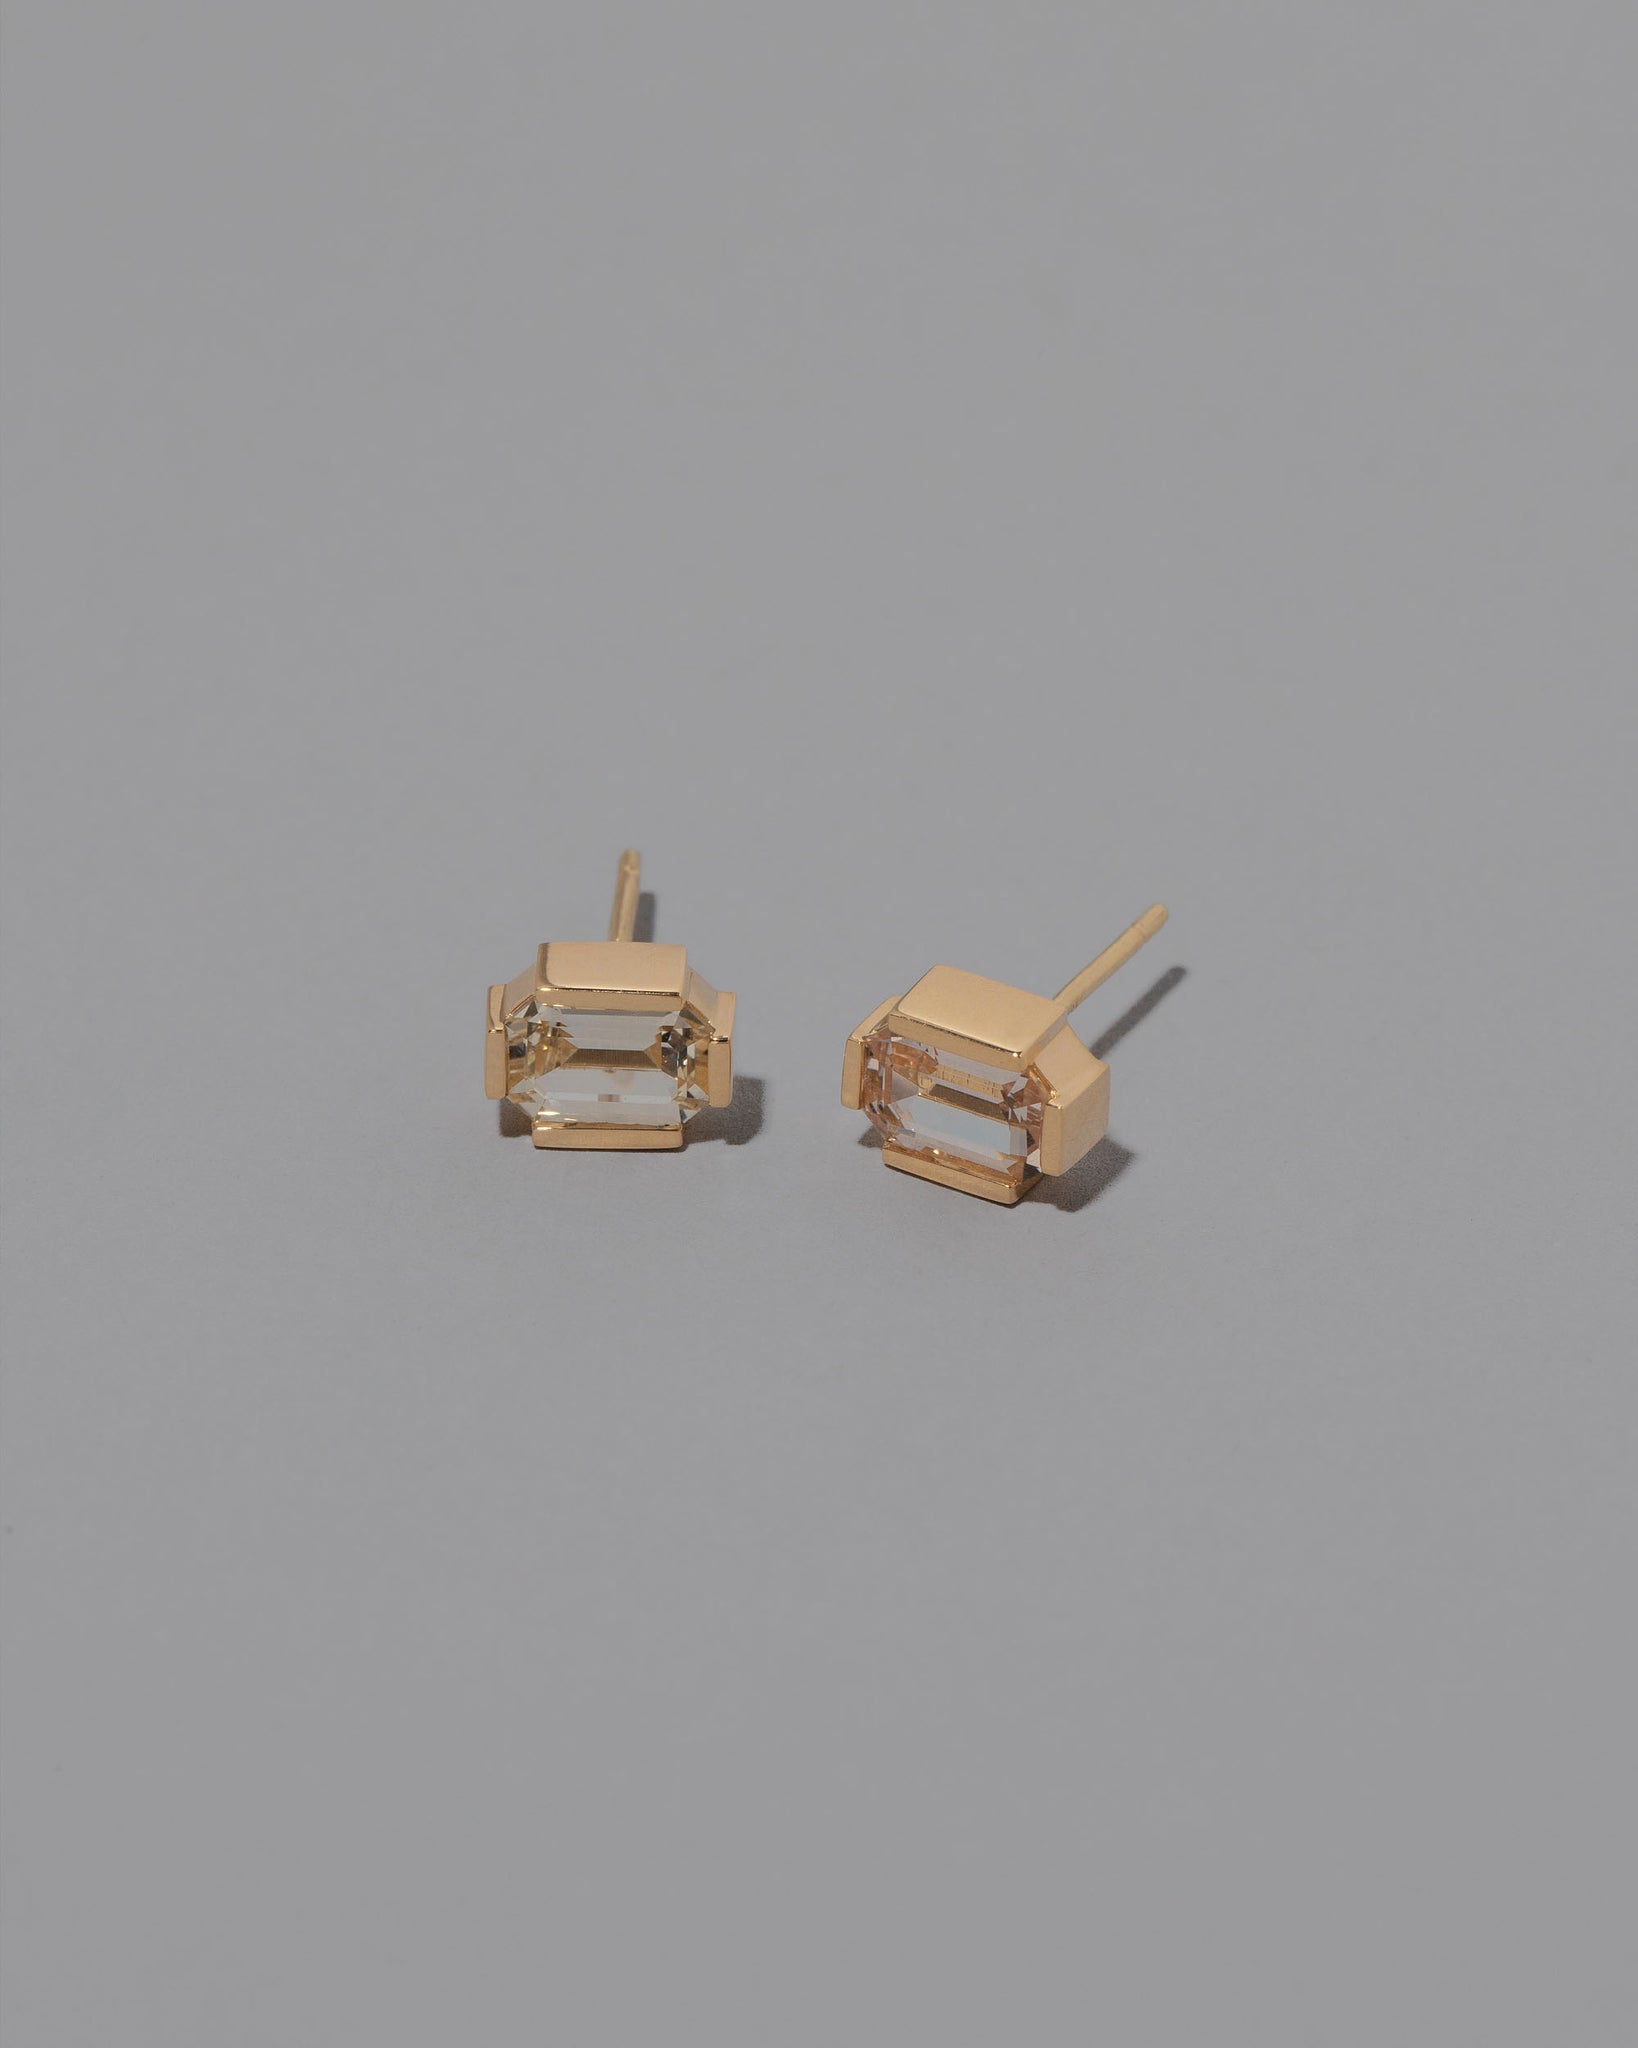 Envelop Earrings on grey color background.